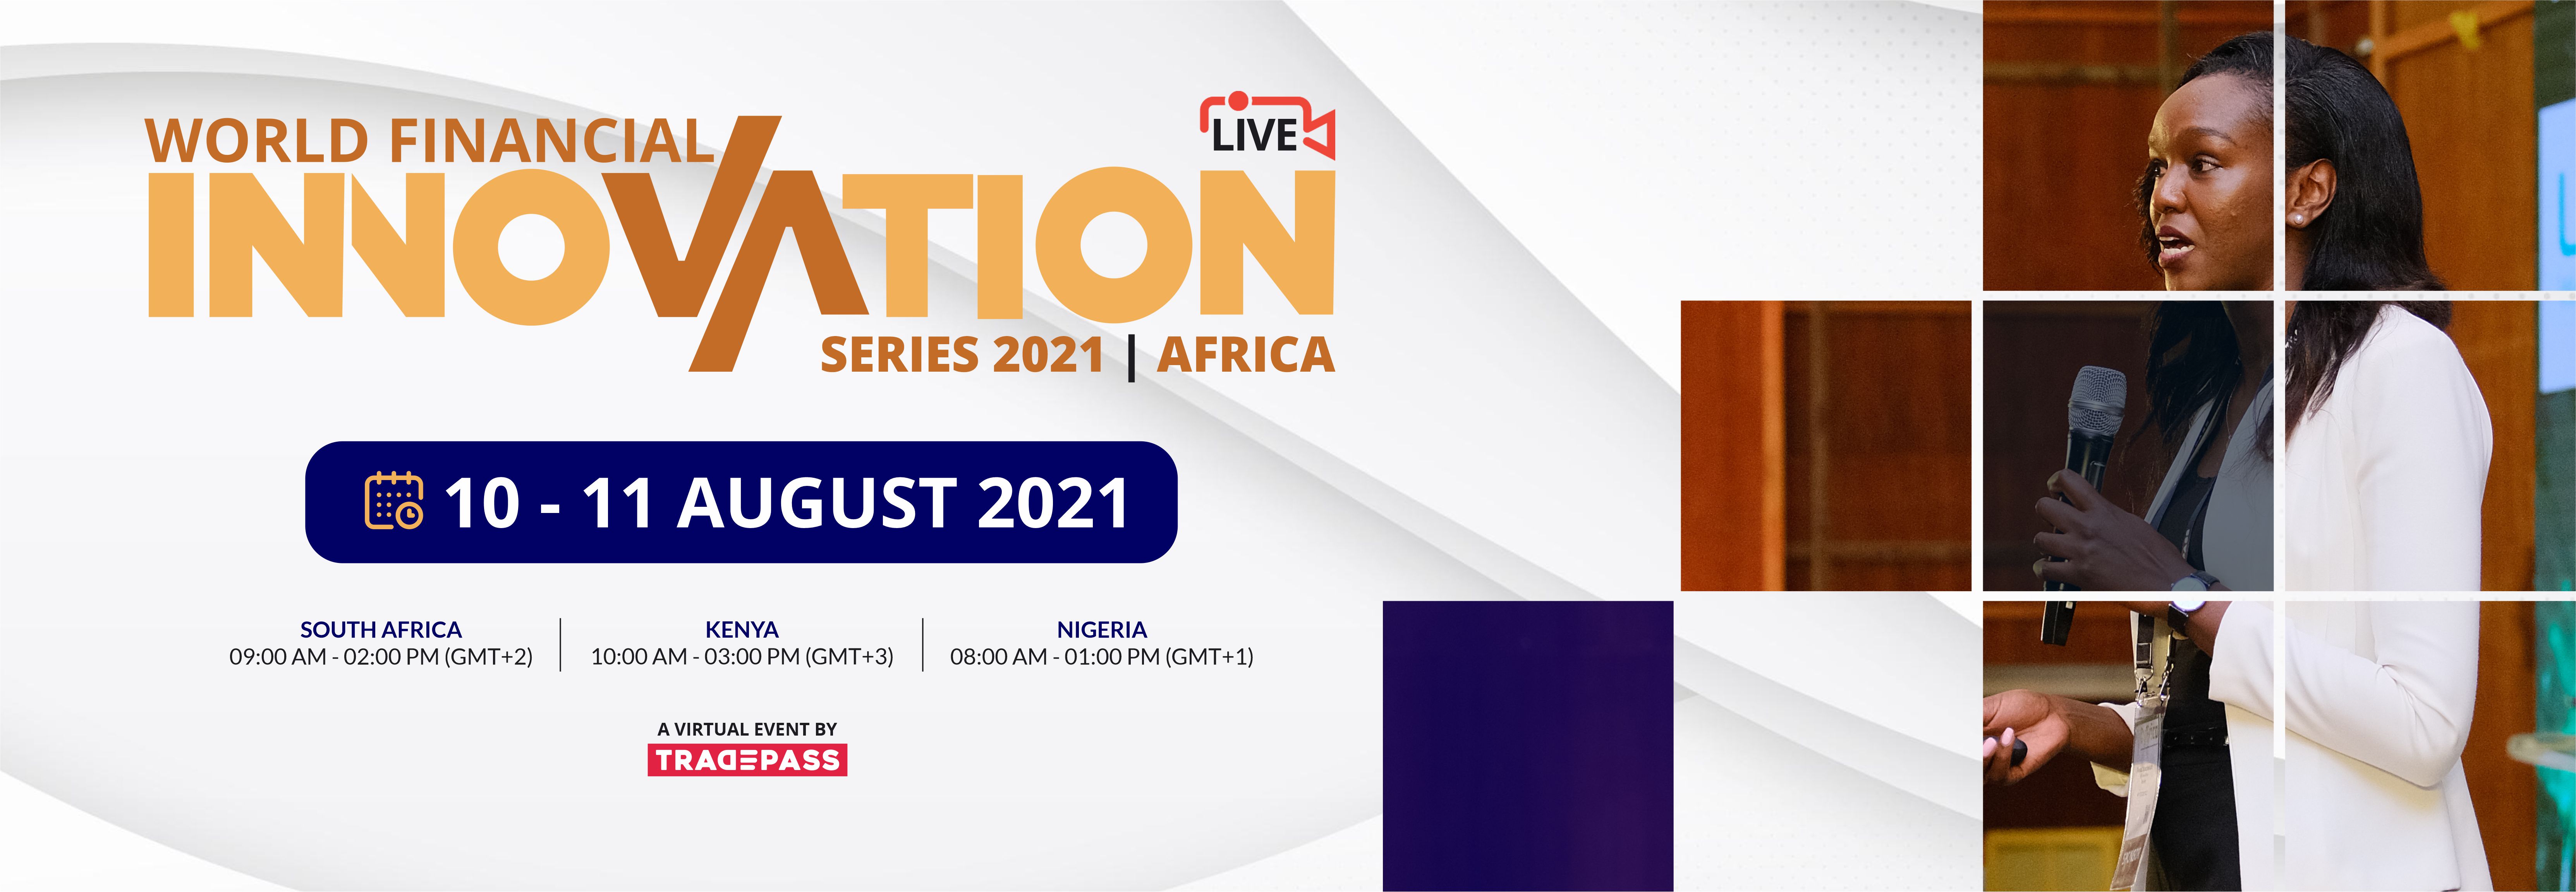 7th Edition World Financial Innovation Series: LIVE - Africa organized by Tradepass